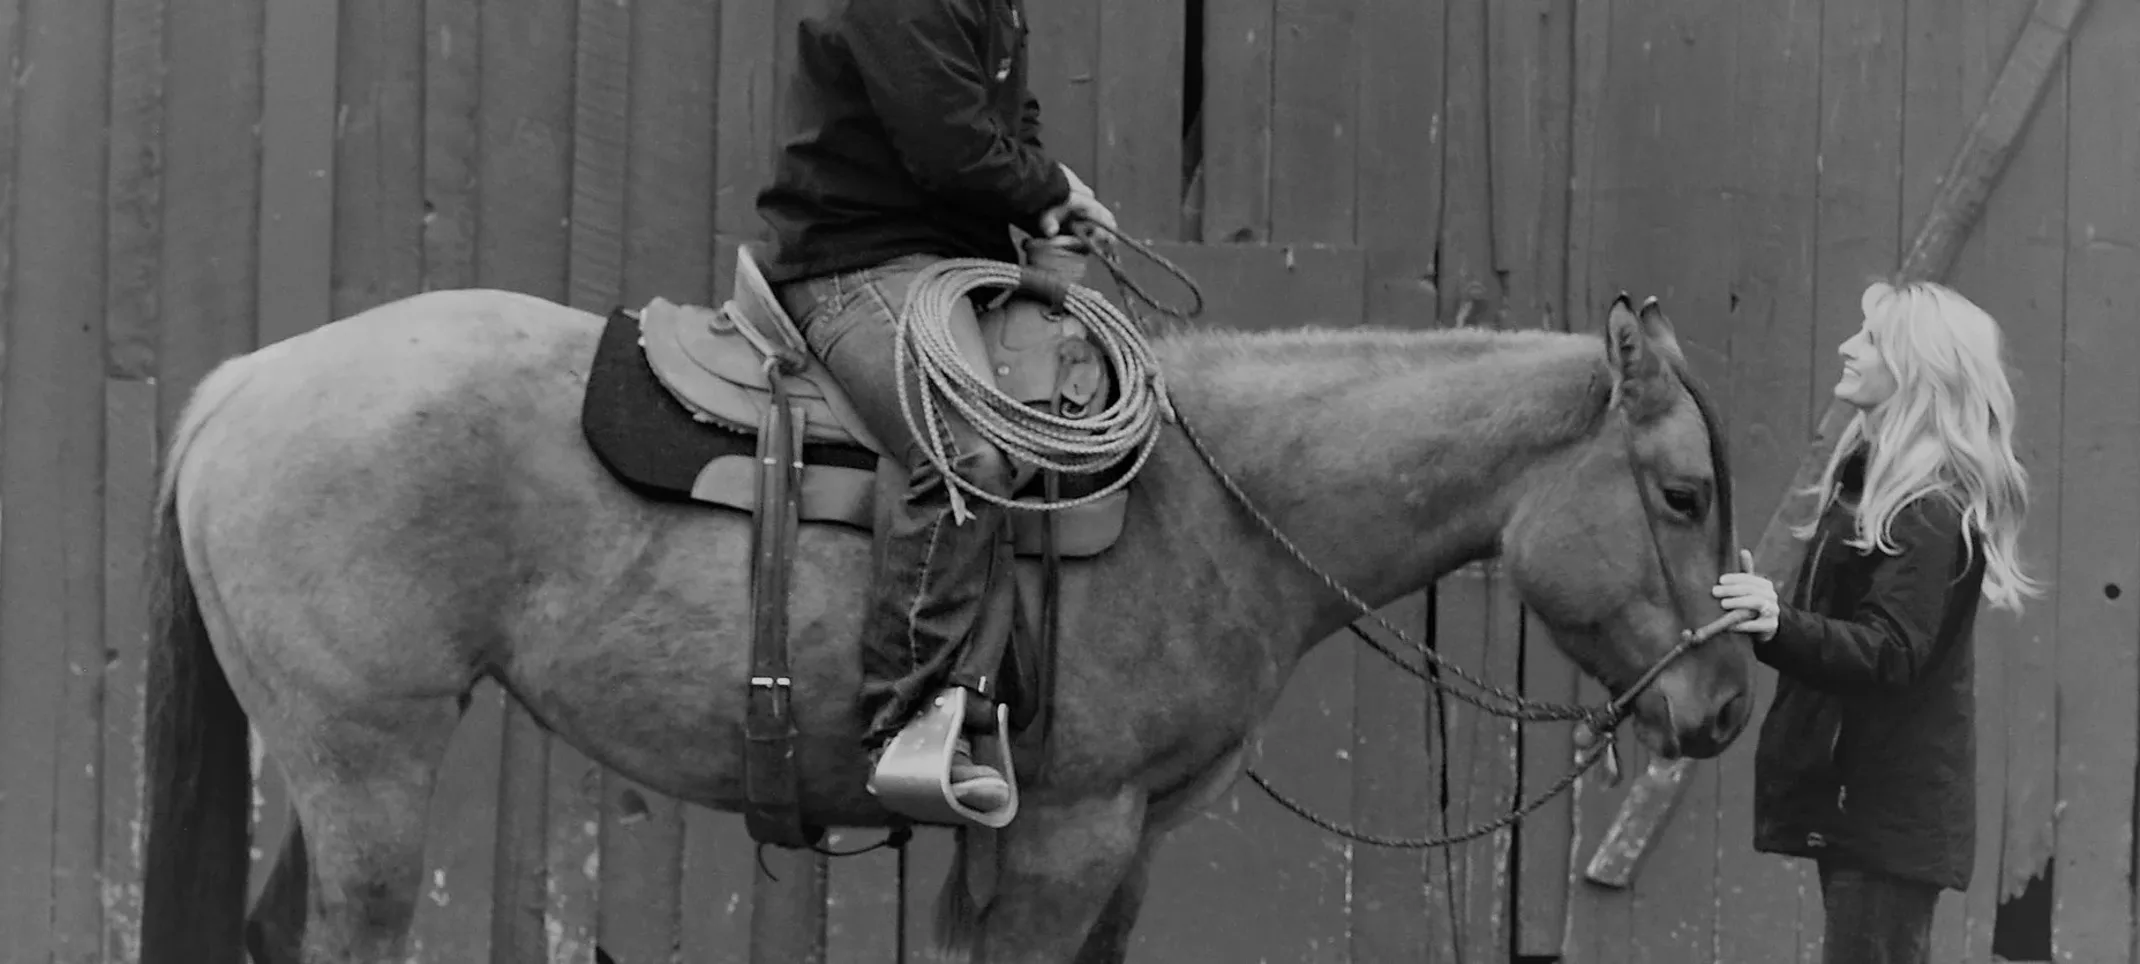 Black and white image of someone sitting on a horse while there is a woman in front.